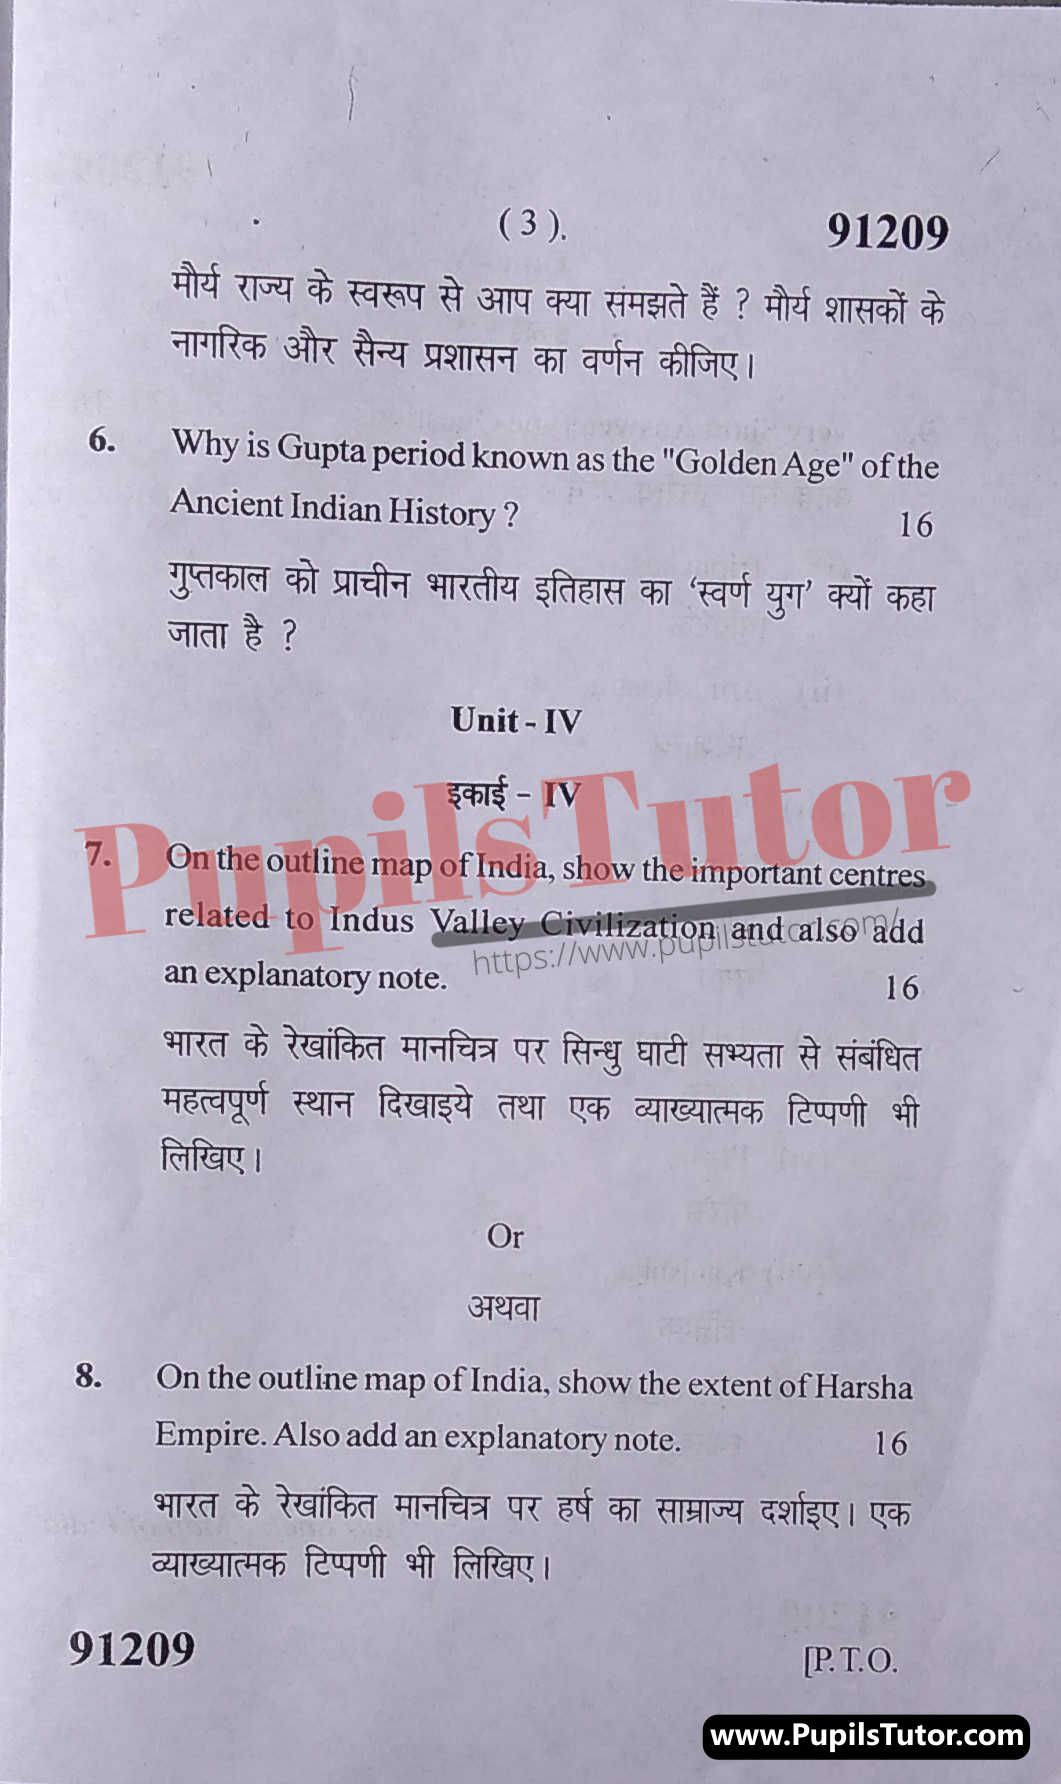 Free Download PDF Of M.D. University B.A. First Semester Latest Question Paper For History Of India Subject (Page 3) - https://www.pupilstutor.com